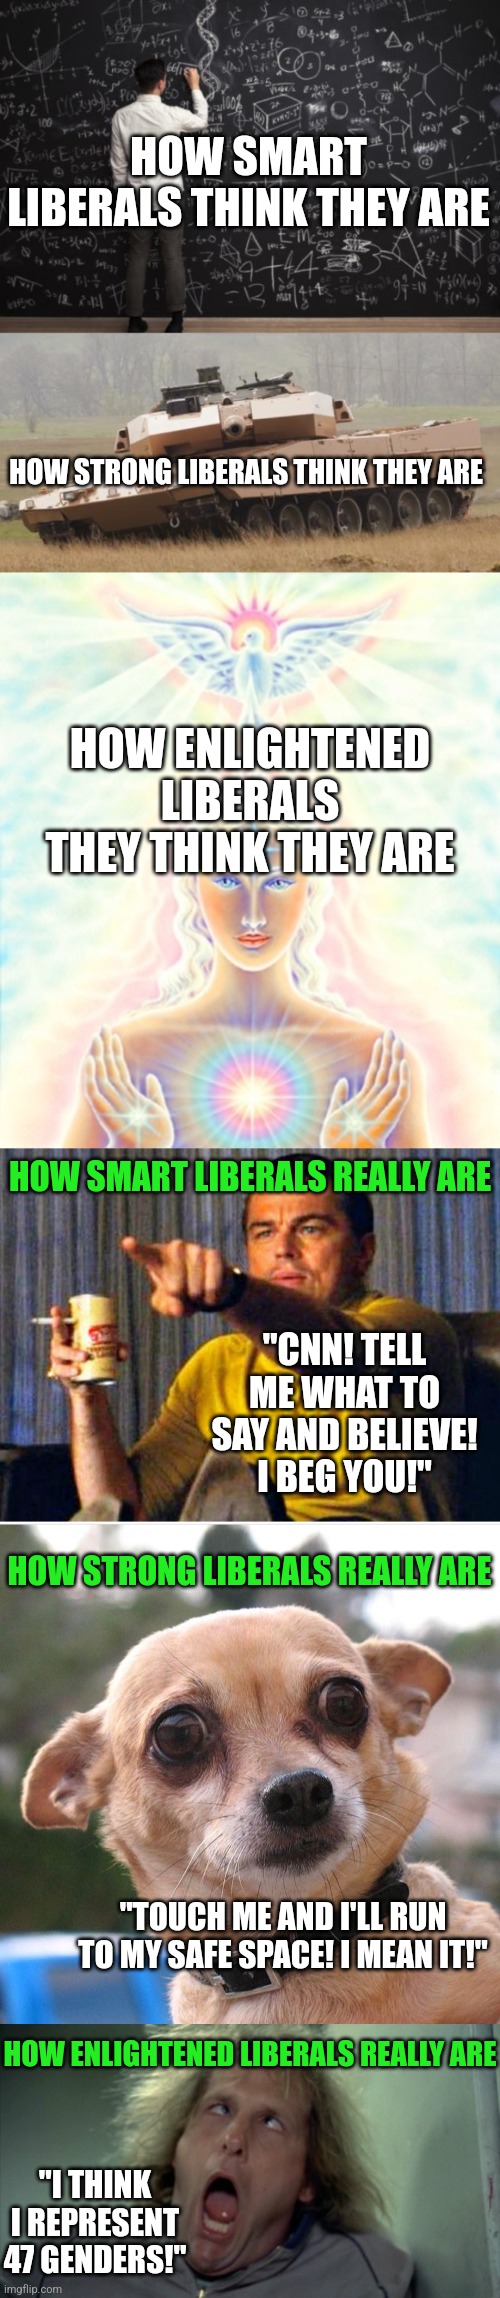 Funniest thing in the world.....a liberal snowflake who thinks they are tough! It's hilarious watching them pretend. | HOW SMART LIBERALS THINK THEY ARE; HOW STRONG LIBERALS THINK THEY ARE; HOW ENLIGHTENED LIBERALS THEY THINK THEY ARE; HOW SMART LIBERALS REALLY ARE; "CNN! TELL ME WHAT TO SAY AND BELIEVE! I BEG YOU!"; HOW STRONG LIBERALS REALLY ARE; "TOUCH ME AND I'LL RUN TO MY SAFE SPACE! I MEAN IT!"; HOW ENLIGHTENED LIBERALS REALLY ARE; "I THINK I REPRESENT 47 GENDERS!" | image tagged in liberal logic,expectation vs reality,weakness,snowflakes,lol so funny,enlightenment | made w/ Imgflip meme maker